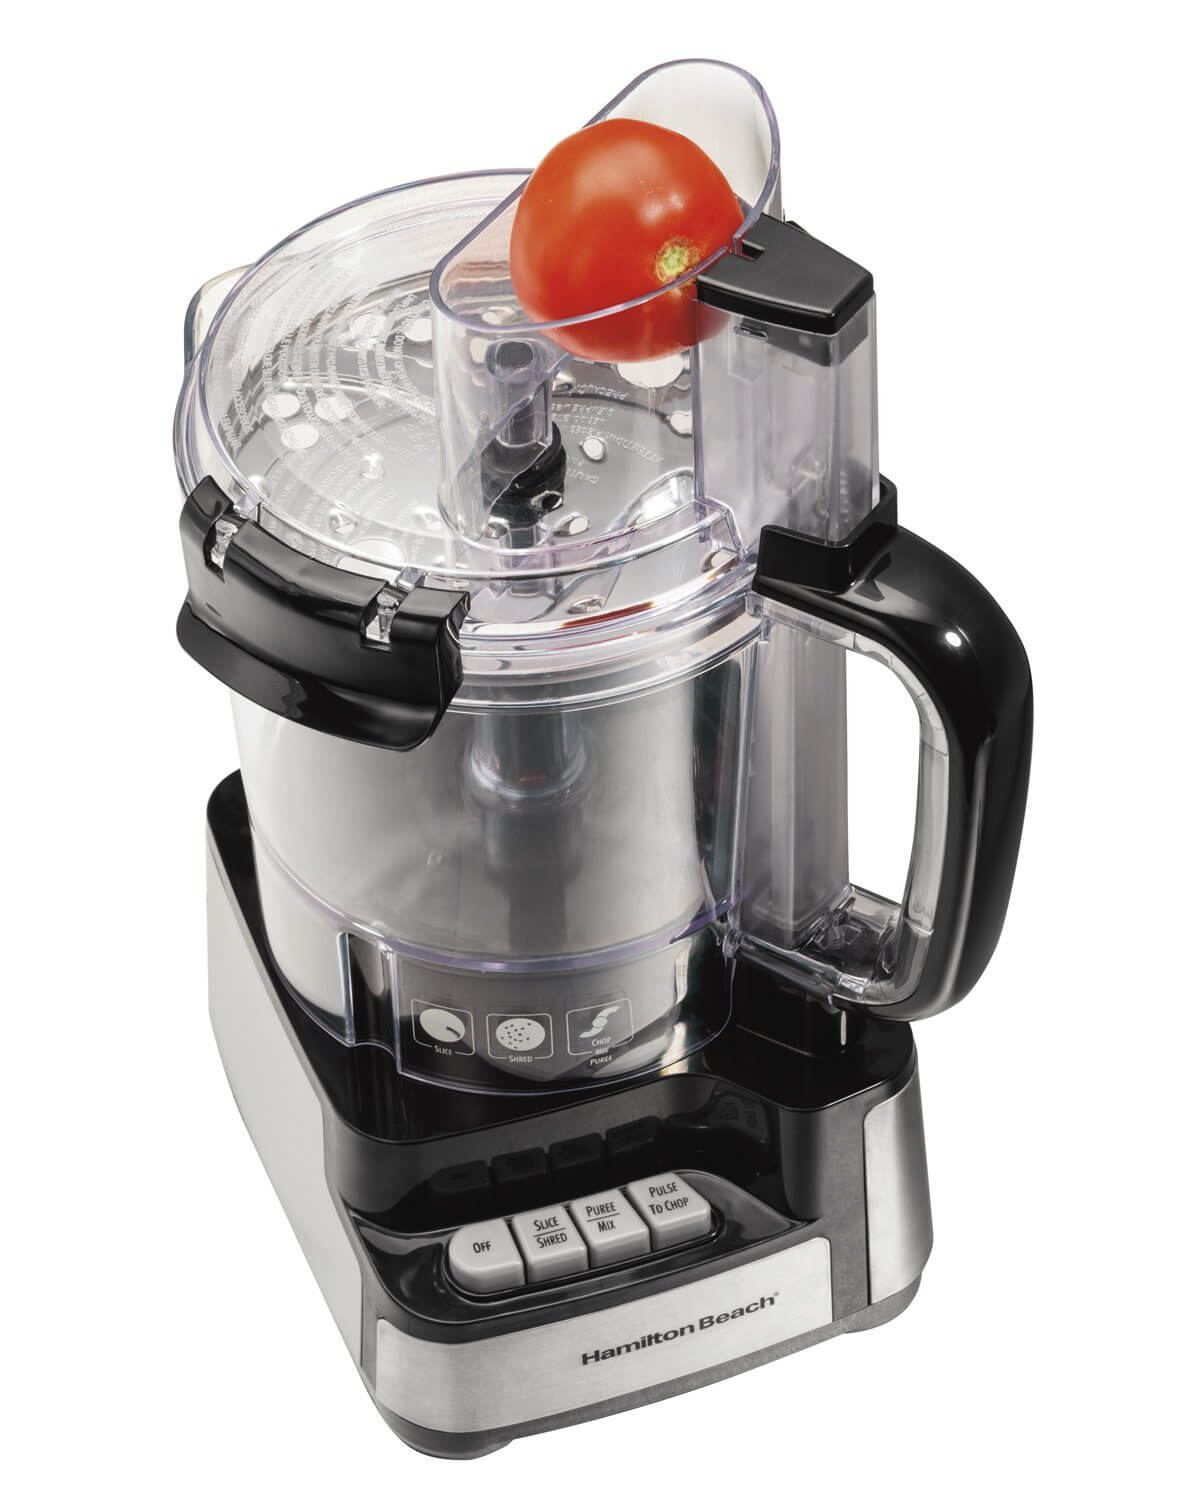 Hamilton Beach 12-Cup Stack and Snap Food Processor